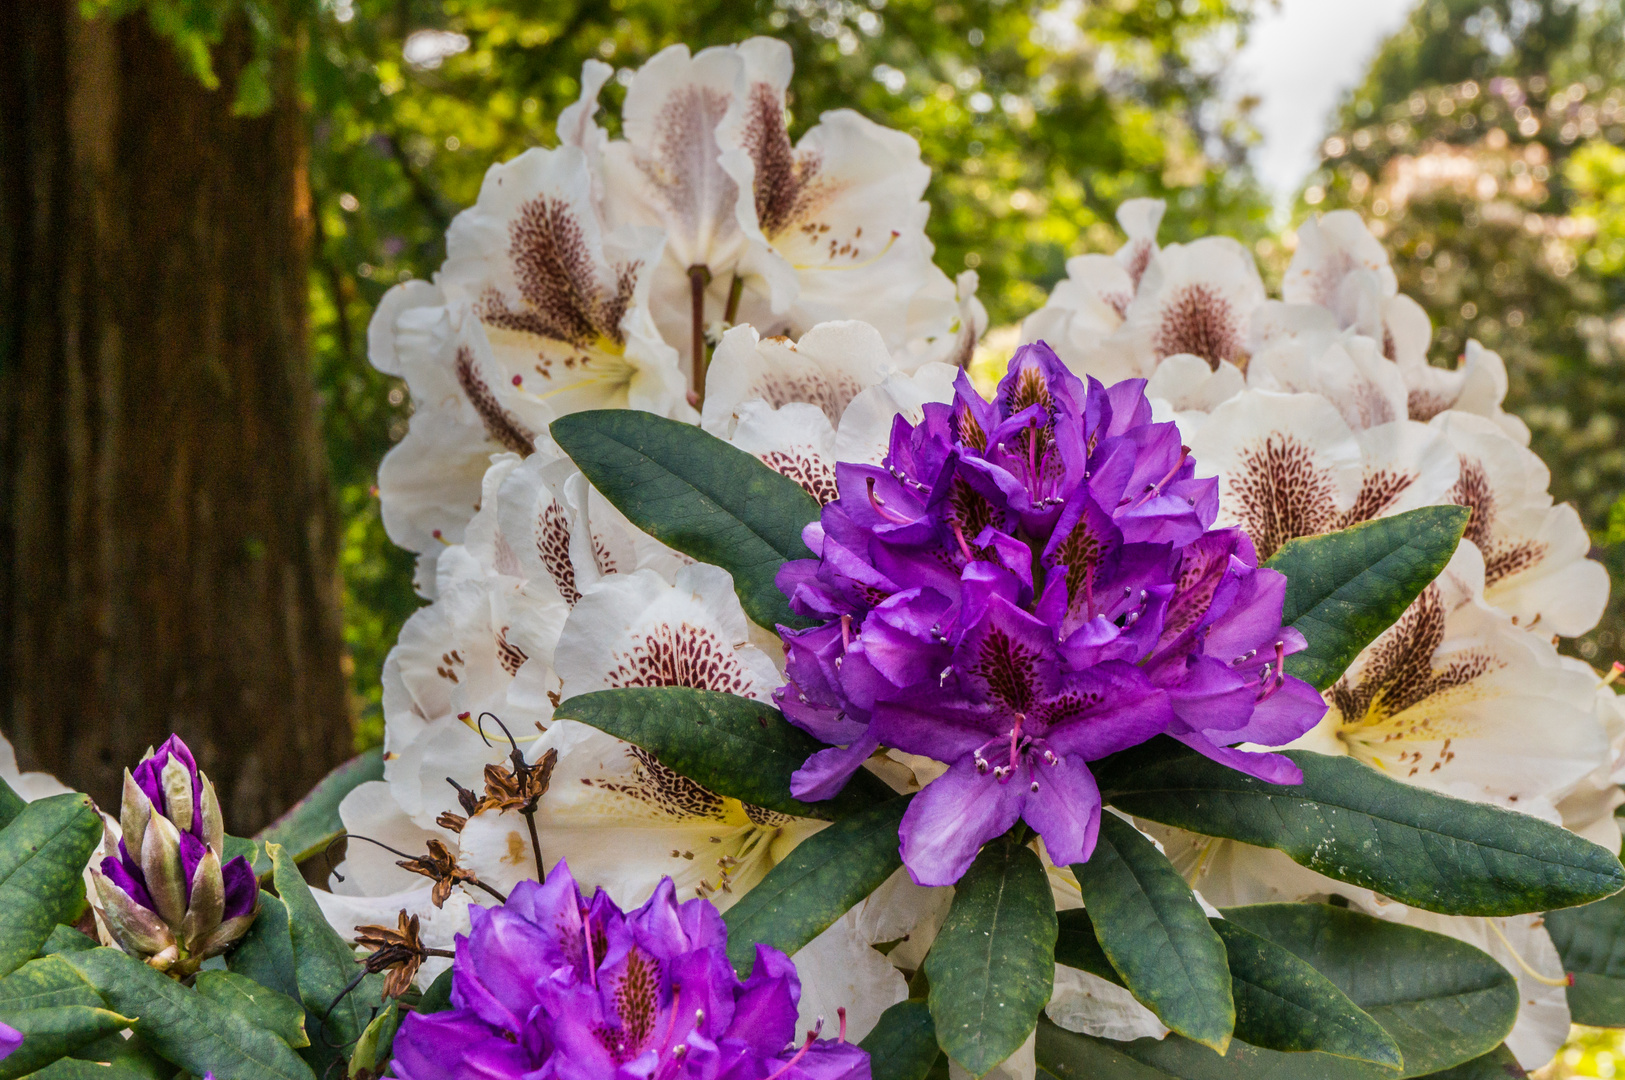 Rhododendron II